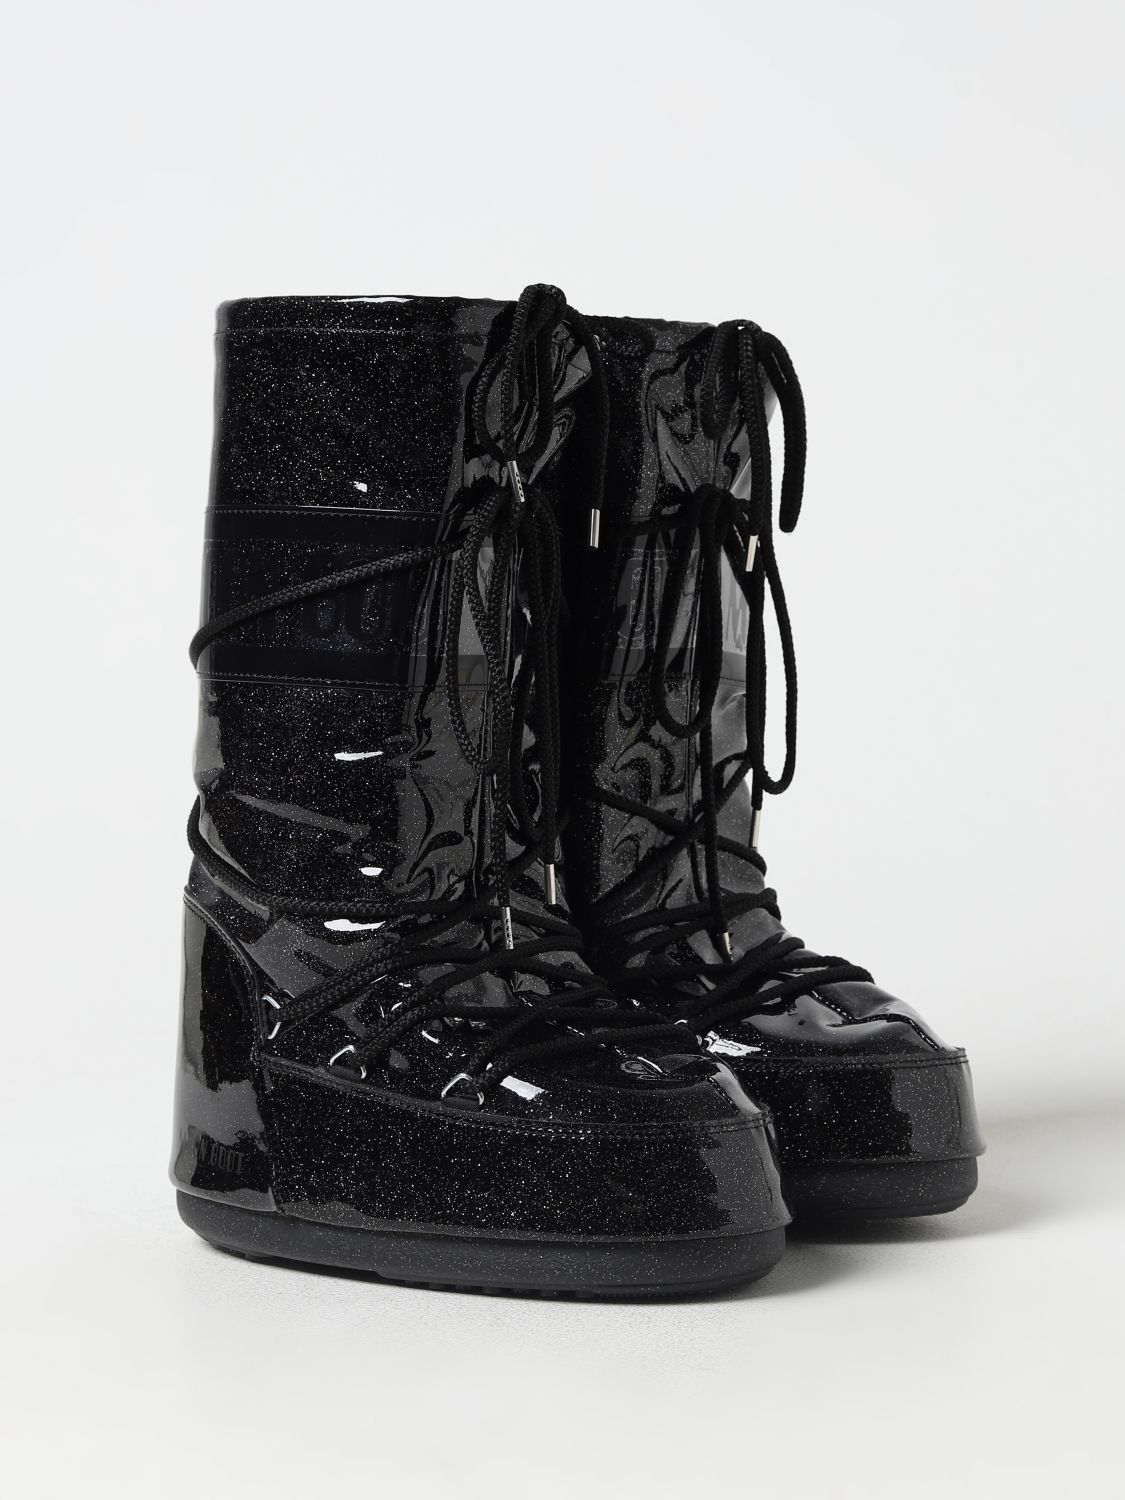 MOON BOOT: boots for woman - Black  Moon Boot boots 14028500 online at